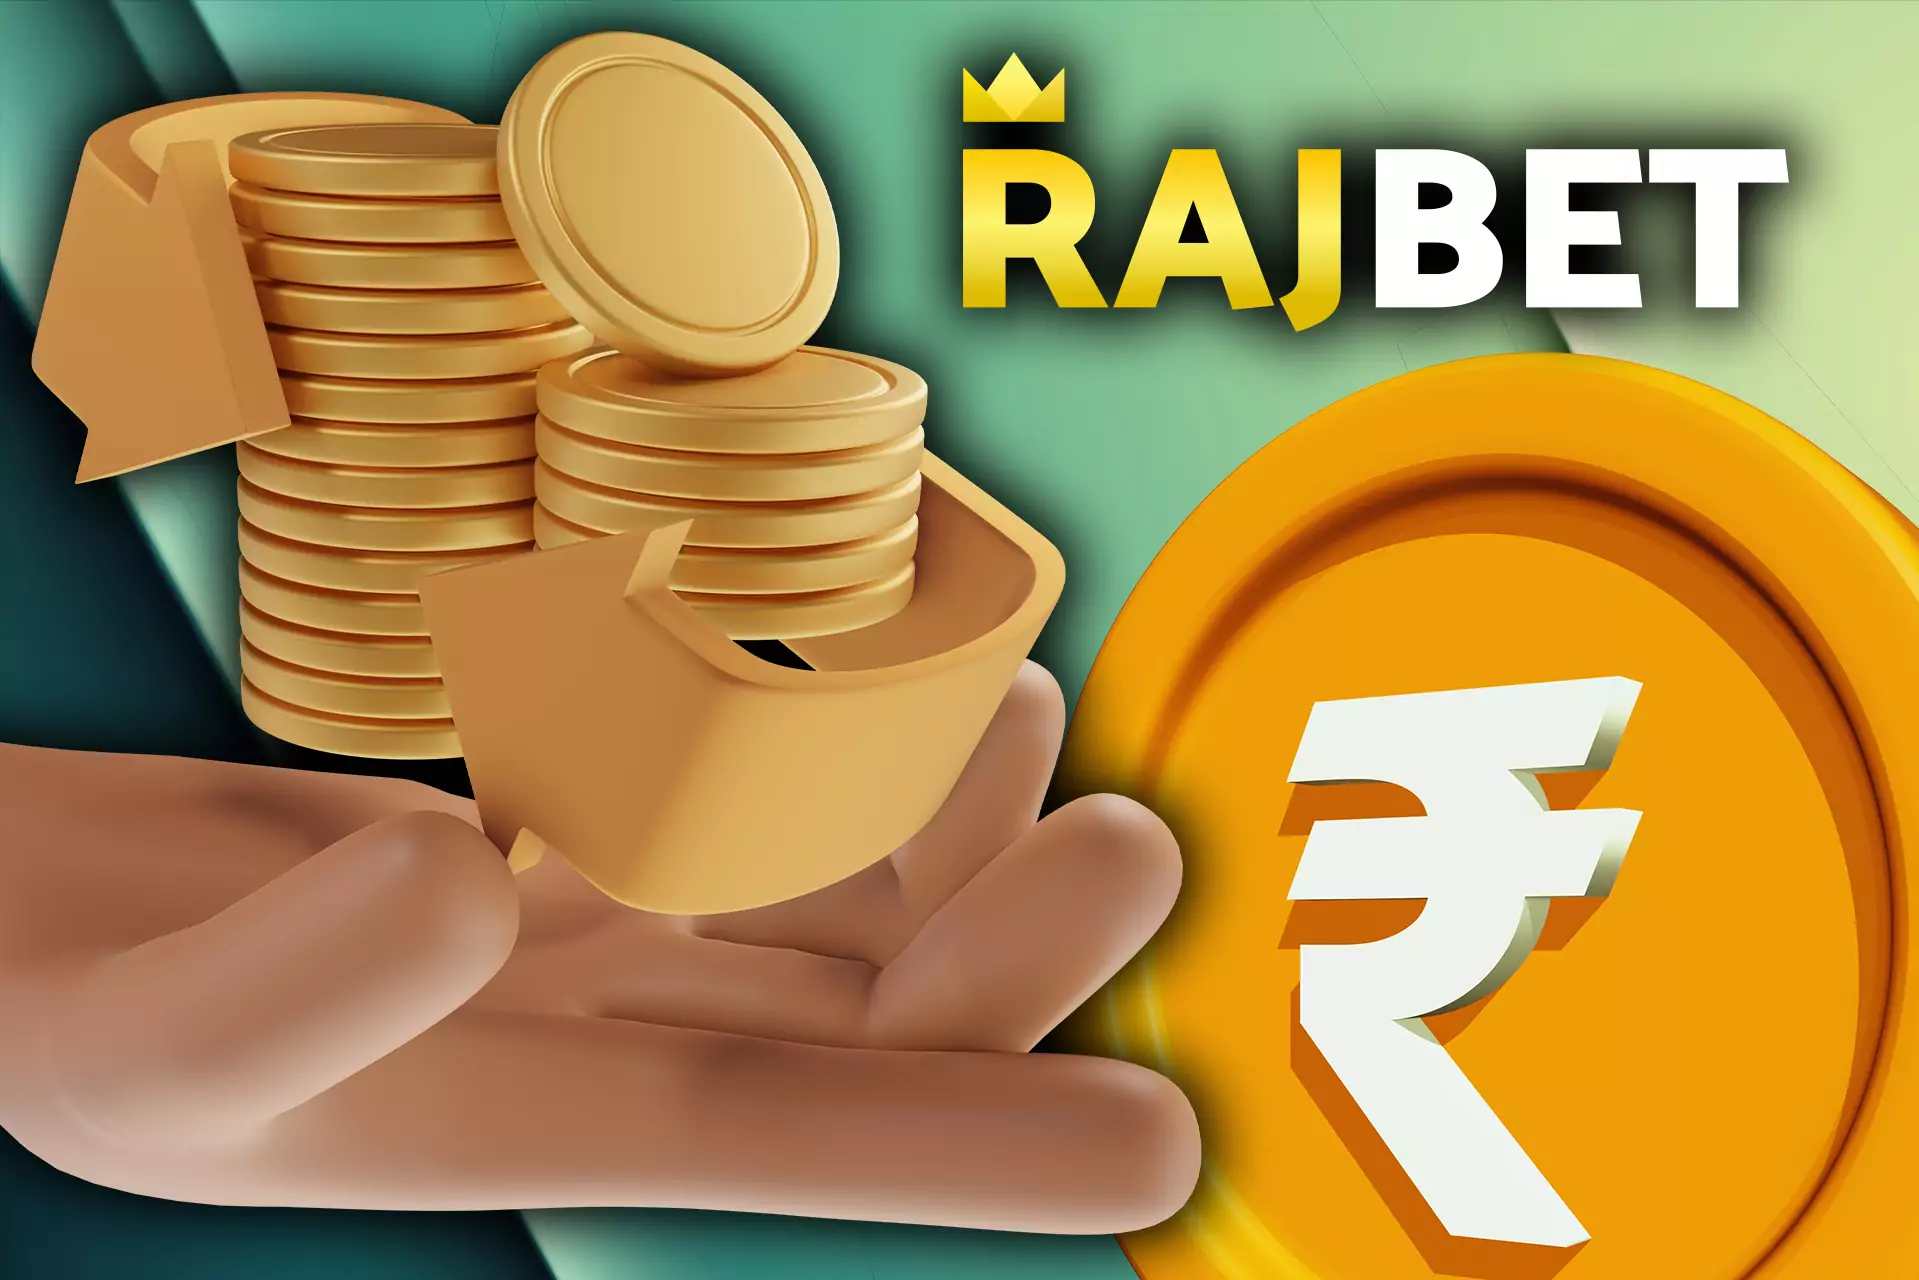 Learn more about cashout at Rajbets.